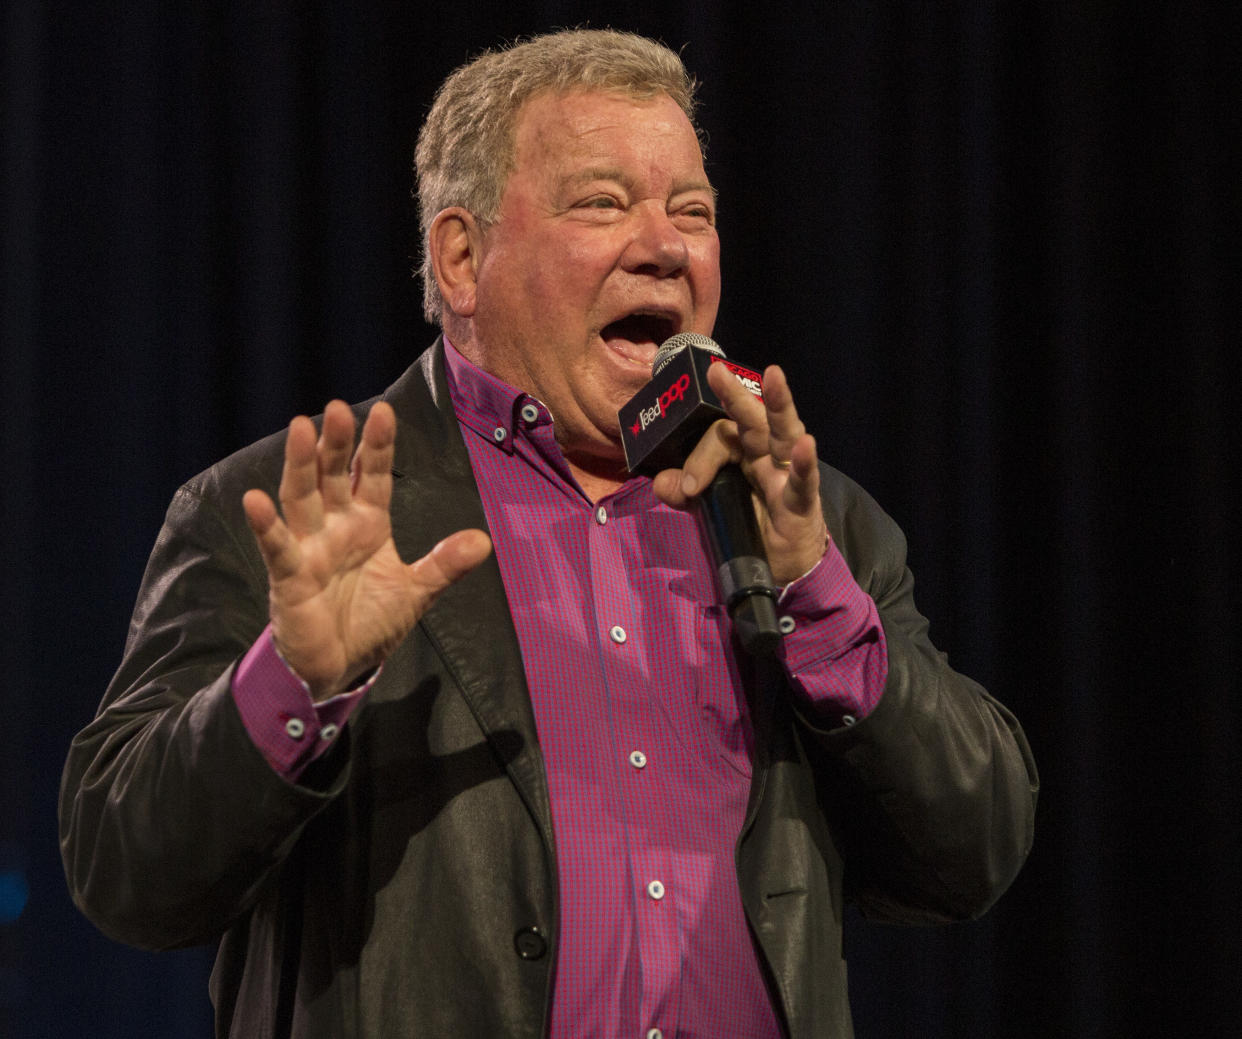 CHICAGO, IL - MARCH 01:  Actor William Shatner during C2E2 at McCormick Place on March 01, 2020 in Chicago, Illinois.  (Photo by Barry Brecheisen/WireImage)